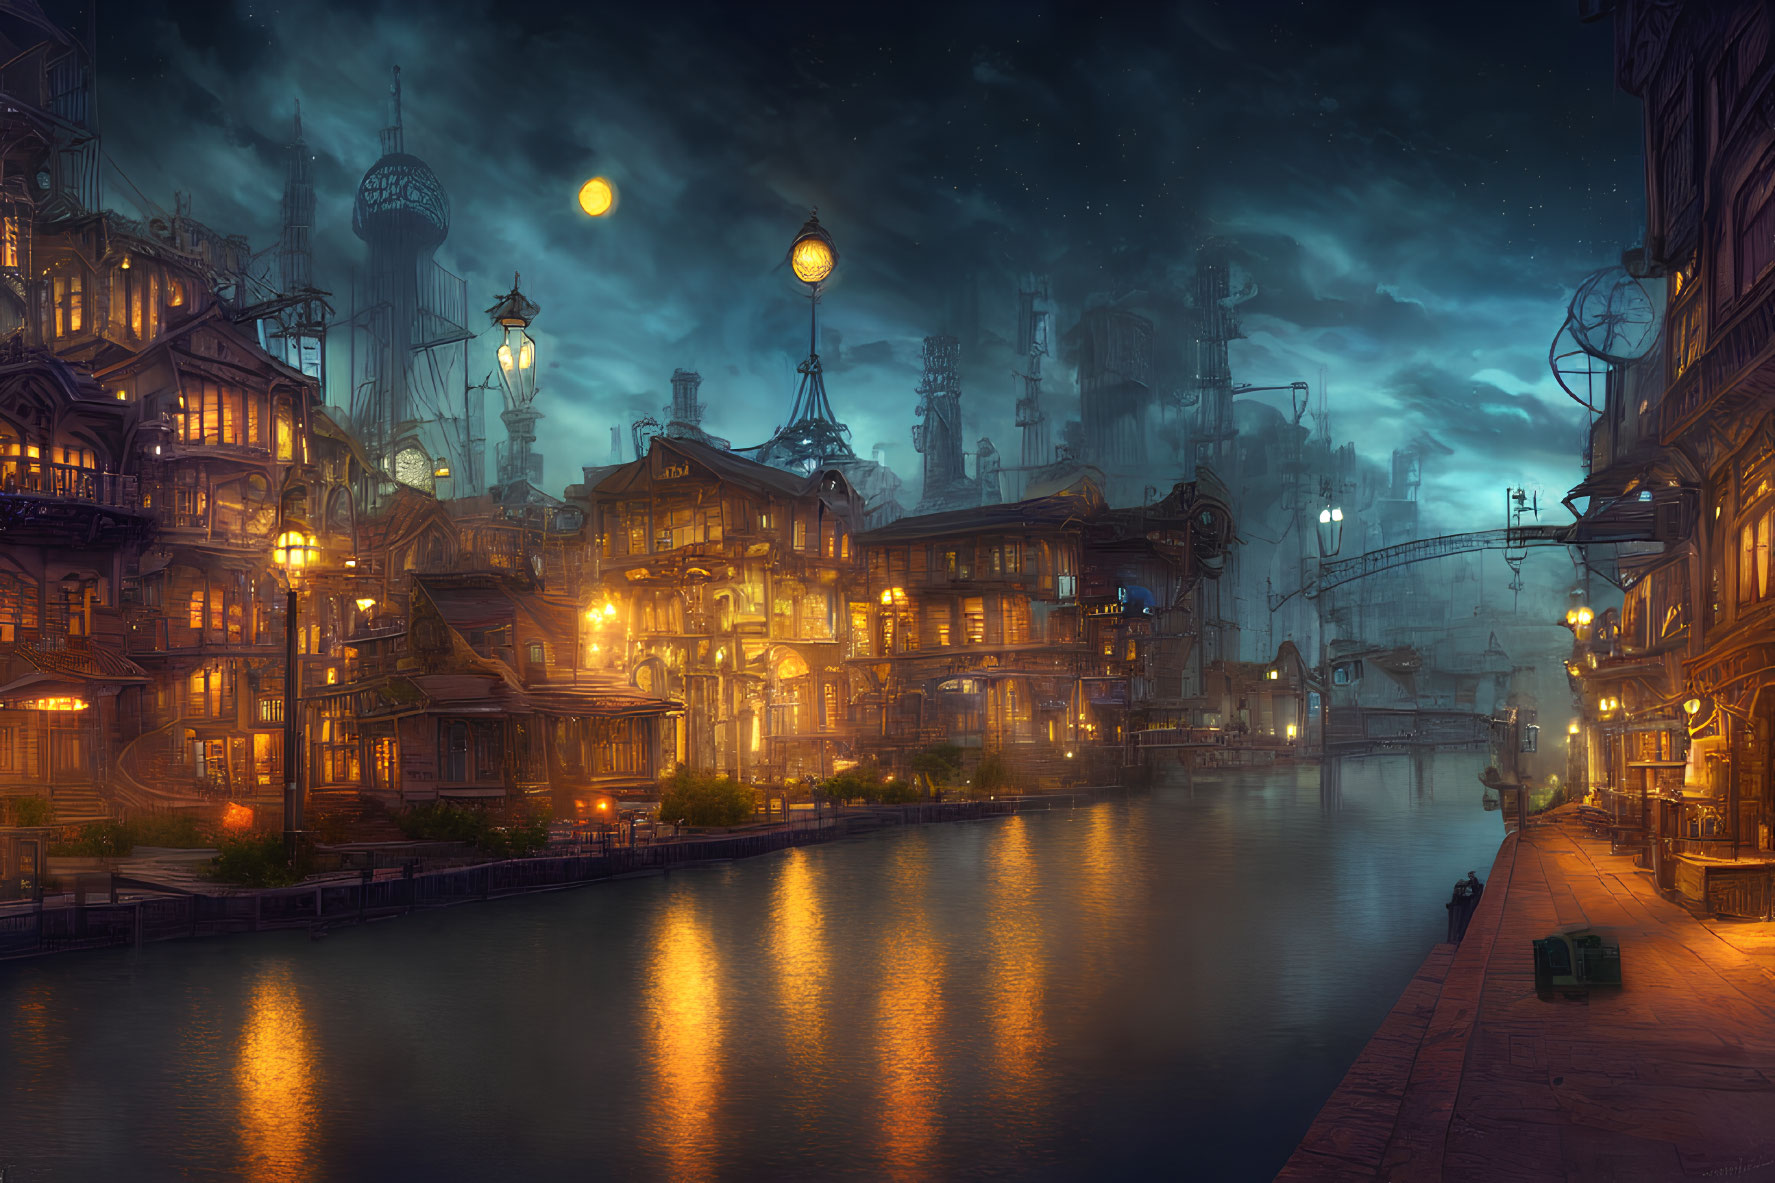 Steampunk cityscape with Victorian architecture and glowing lanterns